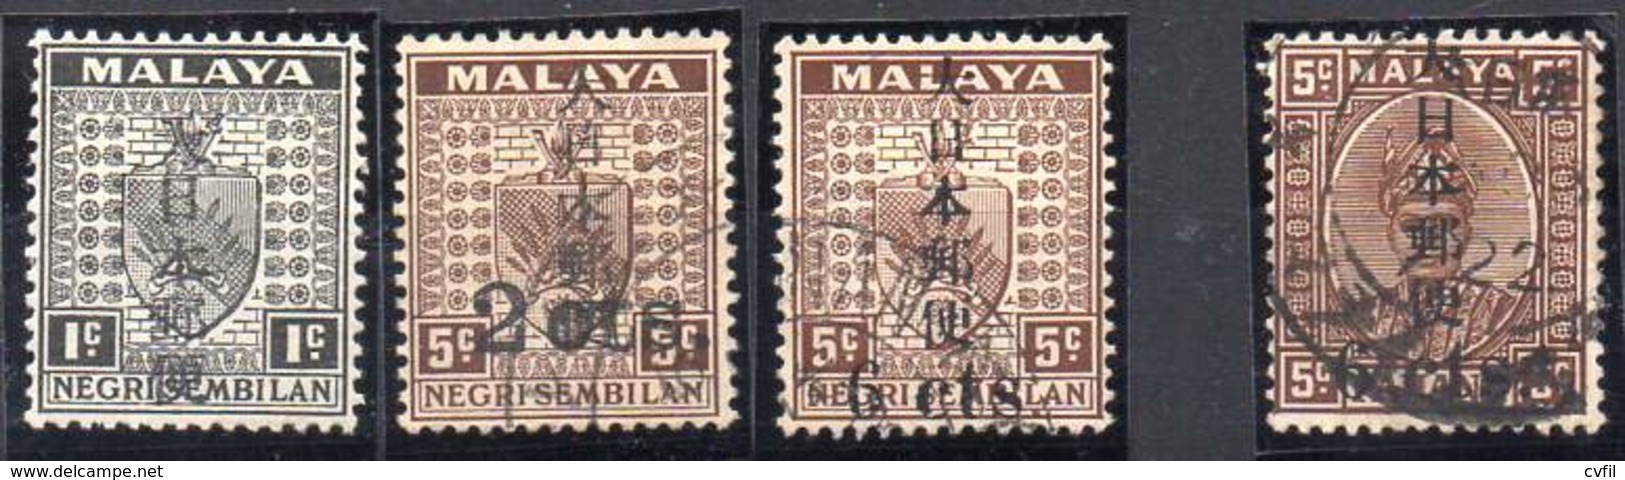 MALAYA, JAPANESE OCCUPATION 1942. 4 Values Ovptd On Negri Sembalan + Pahang. Mint LH And Used - Japanese Occupation